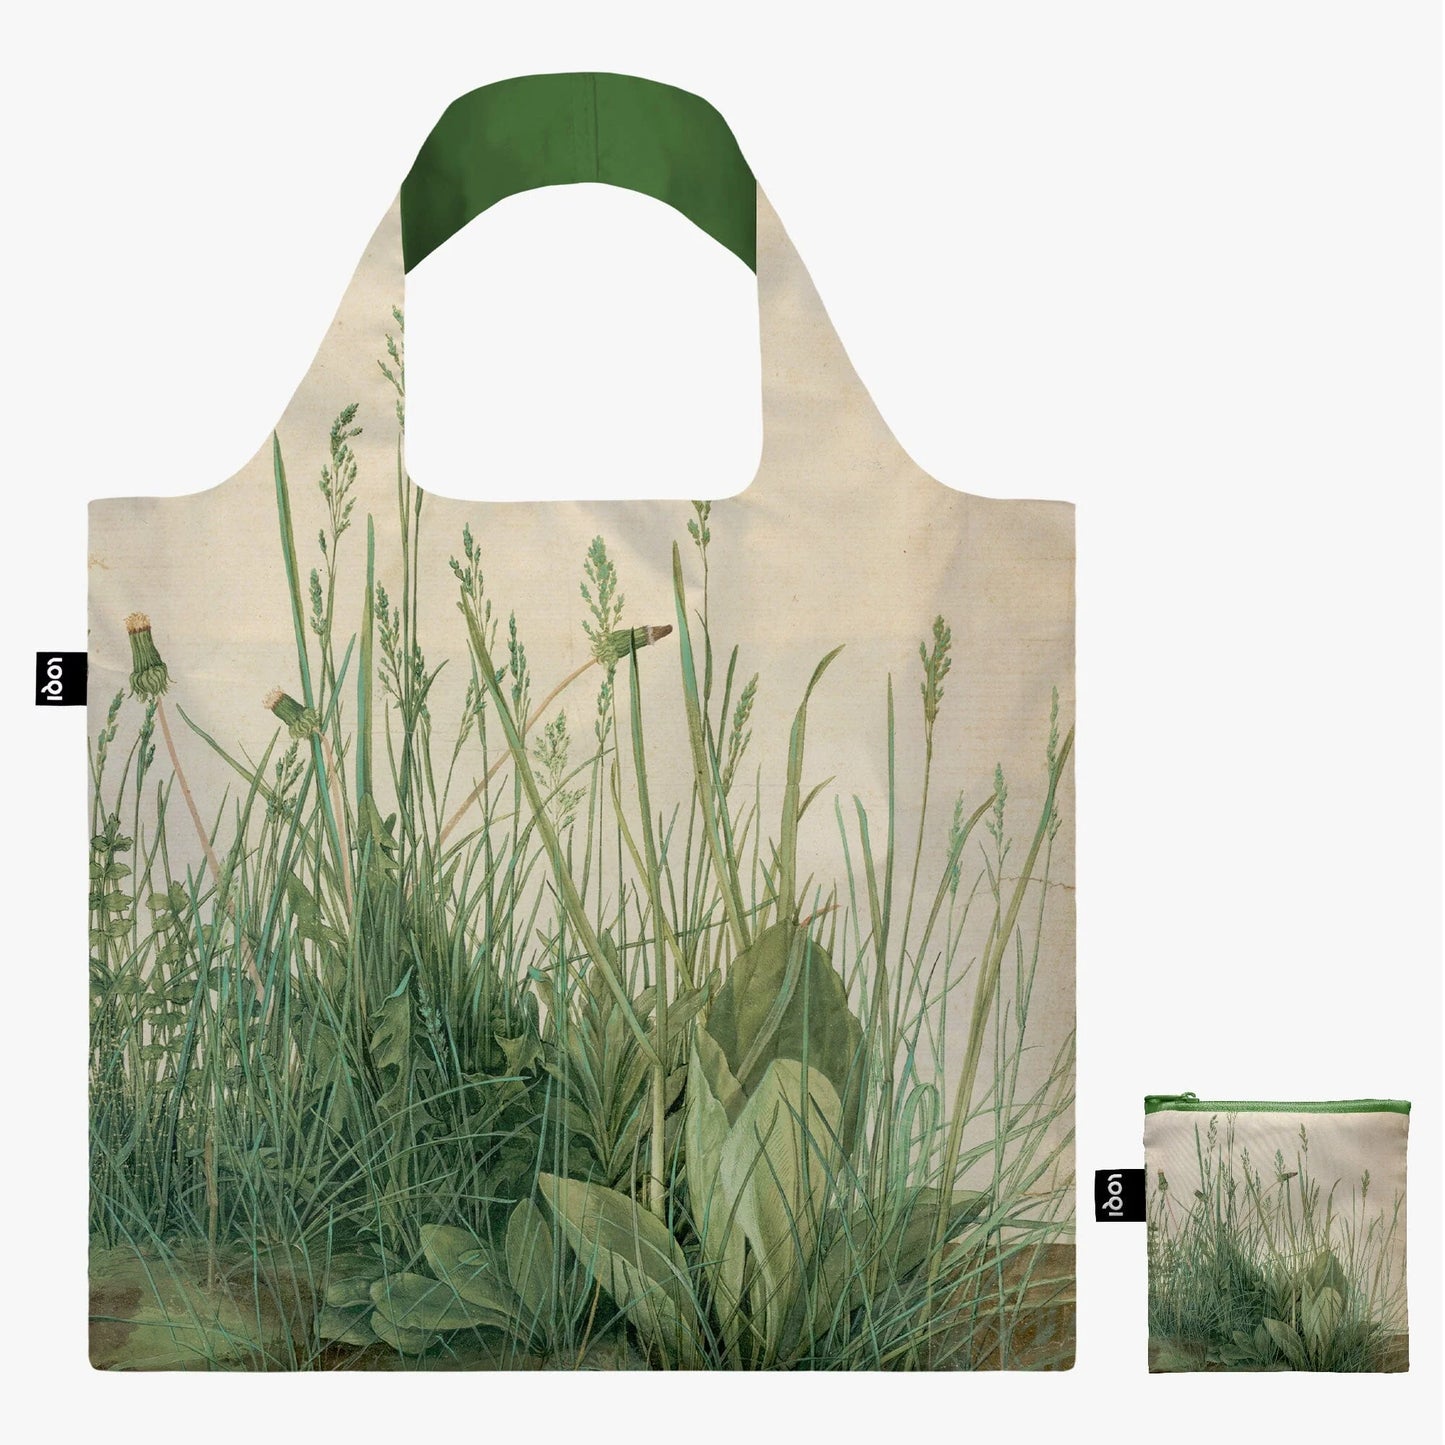 Loqi Reusable Sustainable Bags